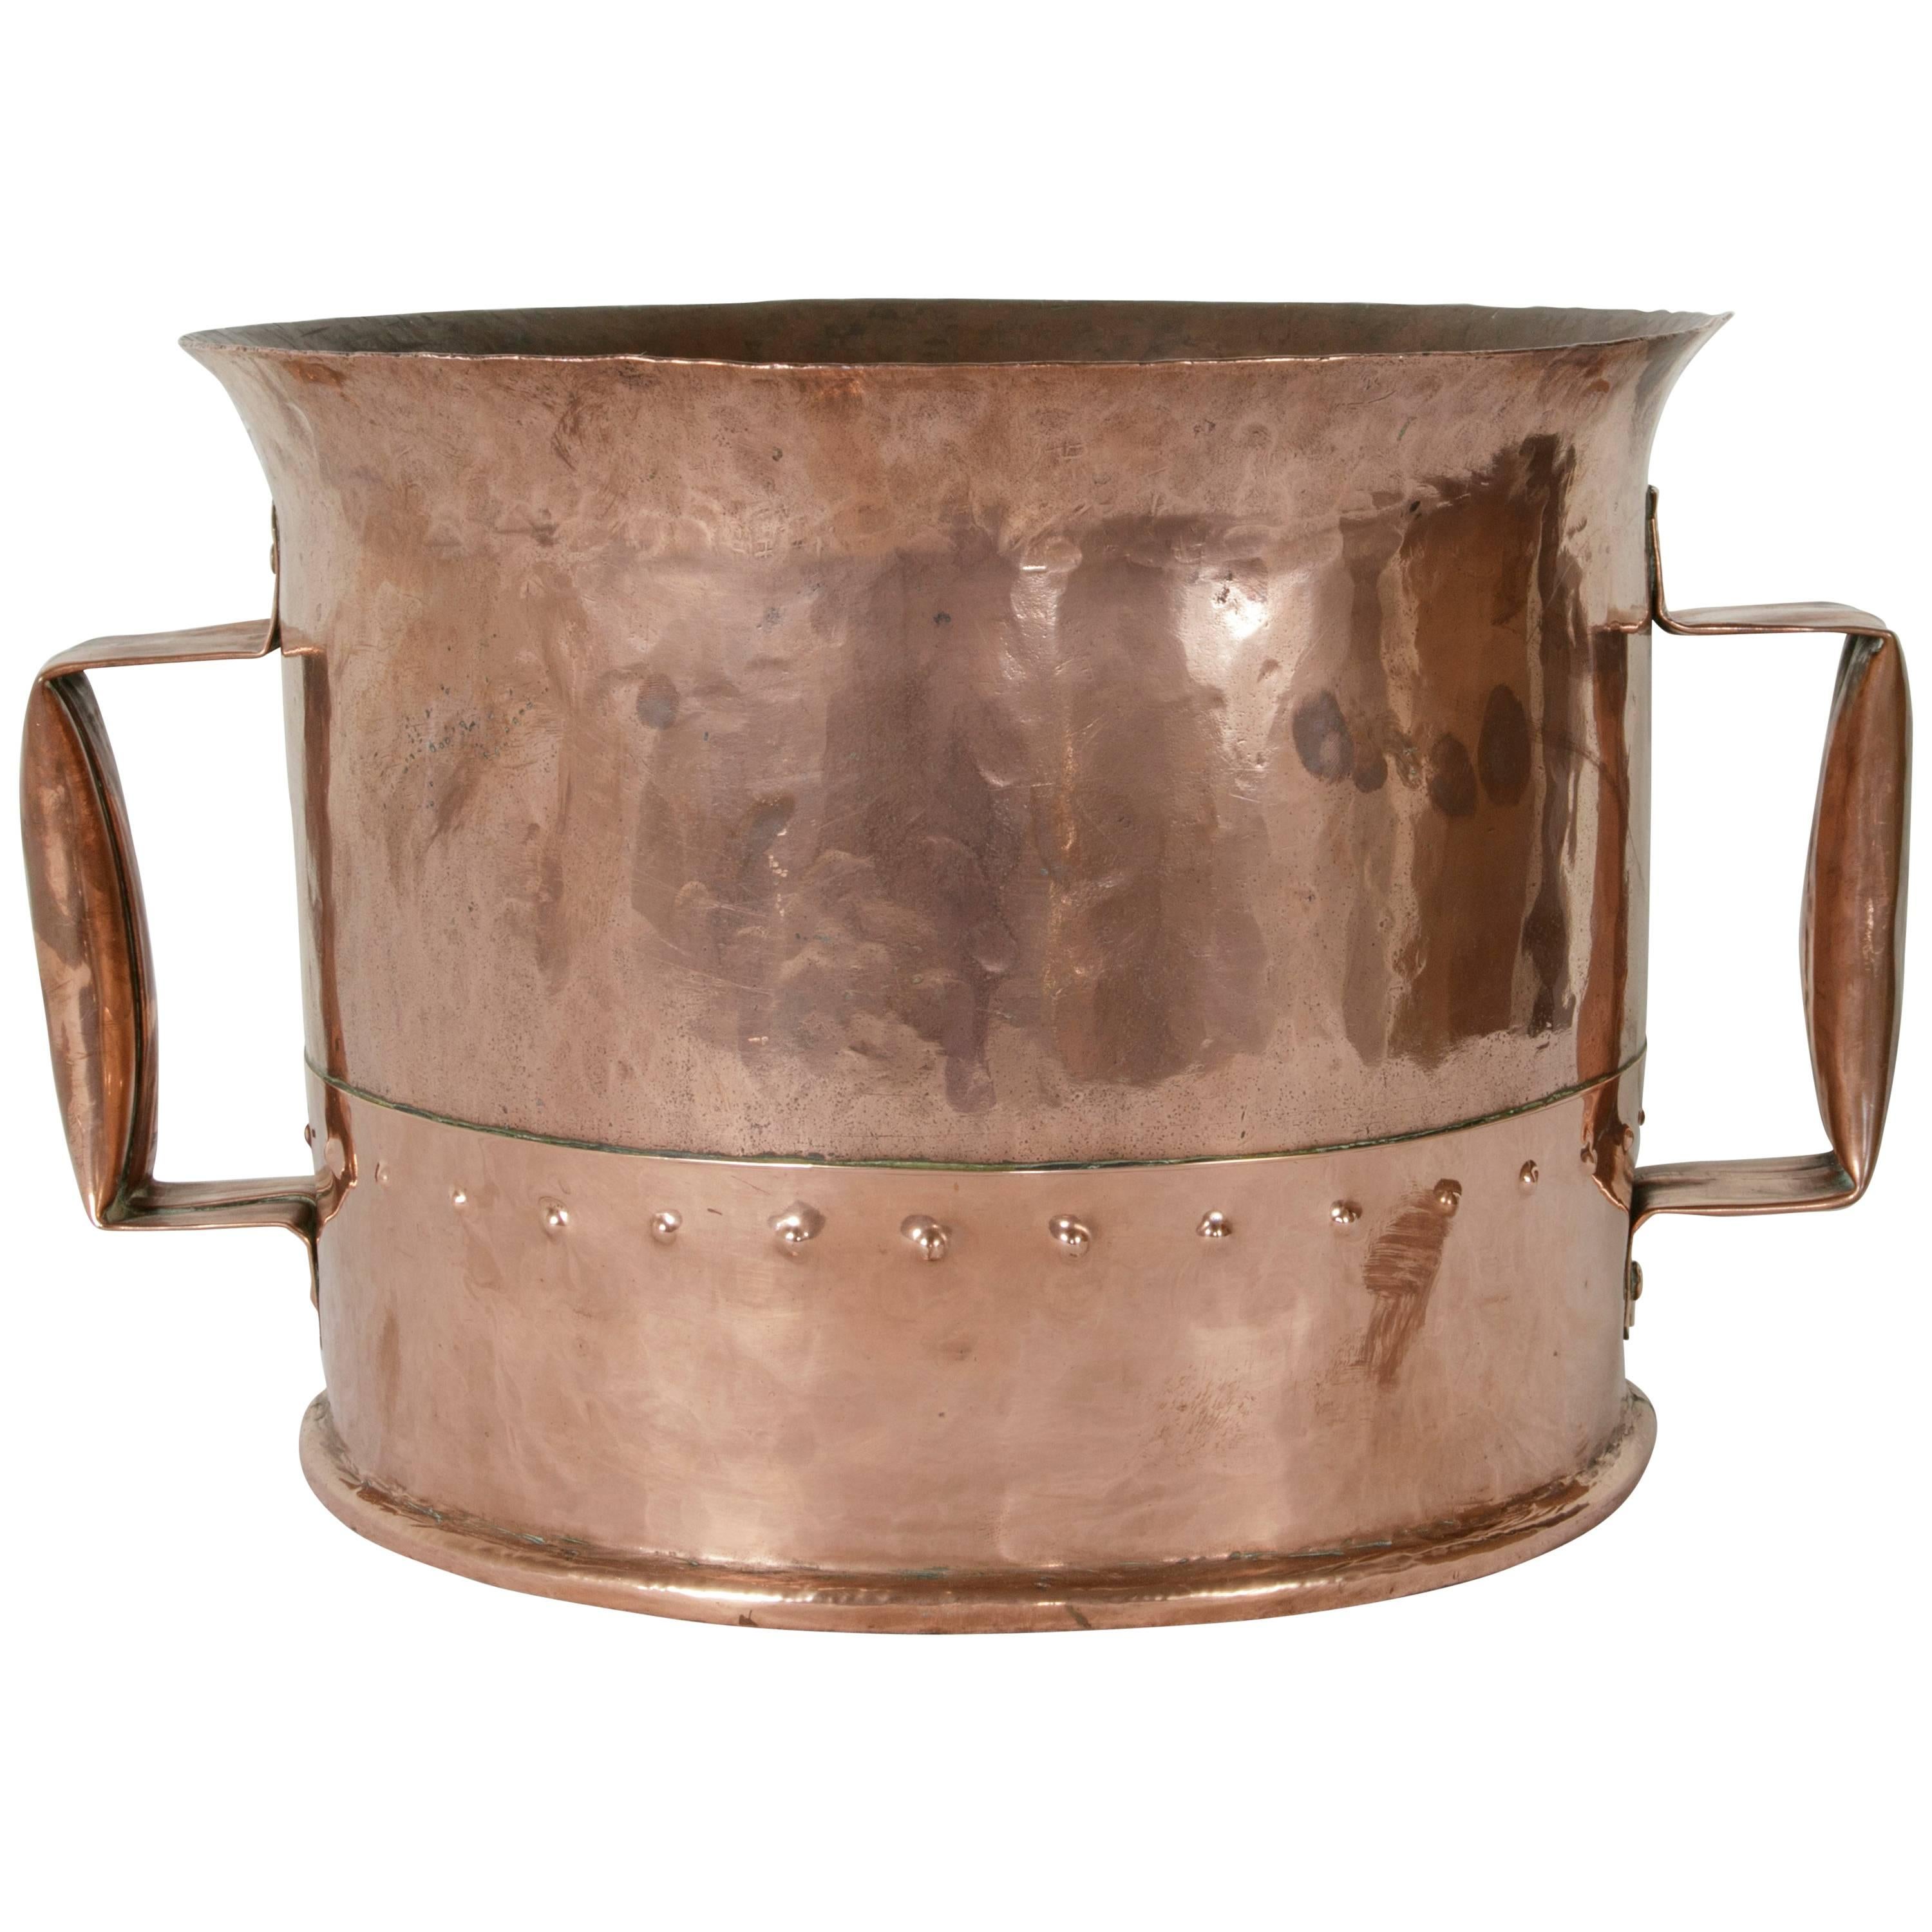 Late 19th Century French Riveted Copper Water Bucket with Two Handles